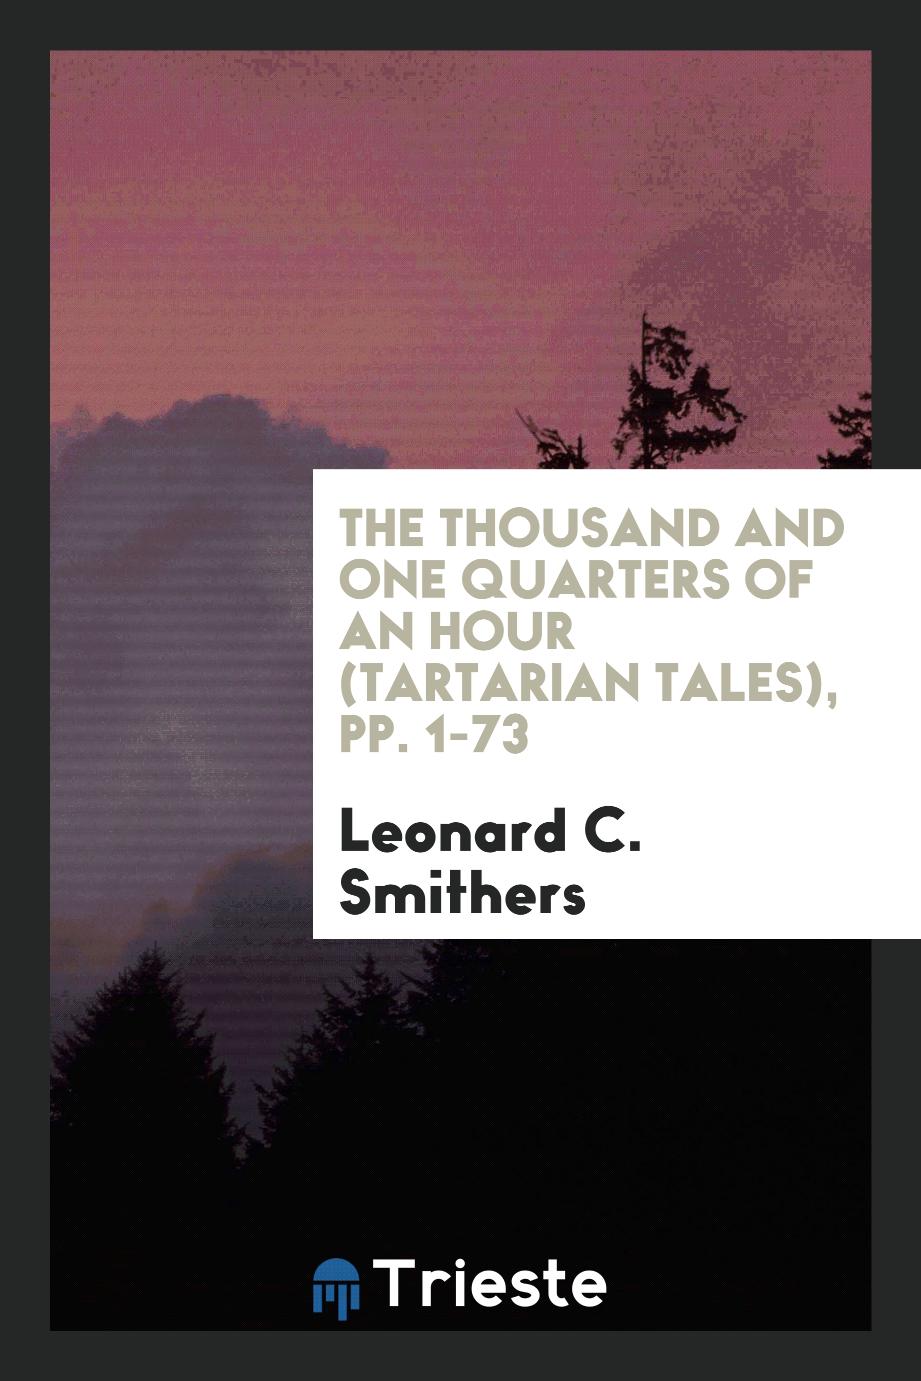 The thousand and one quarters of an hour (Tartarian tales), pp. 1-73